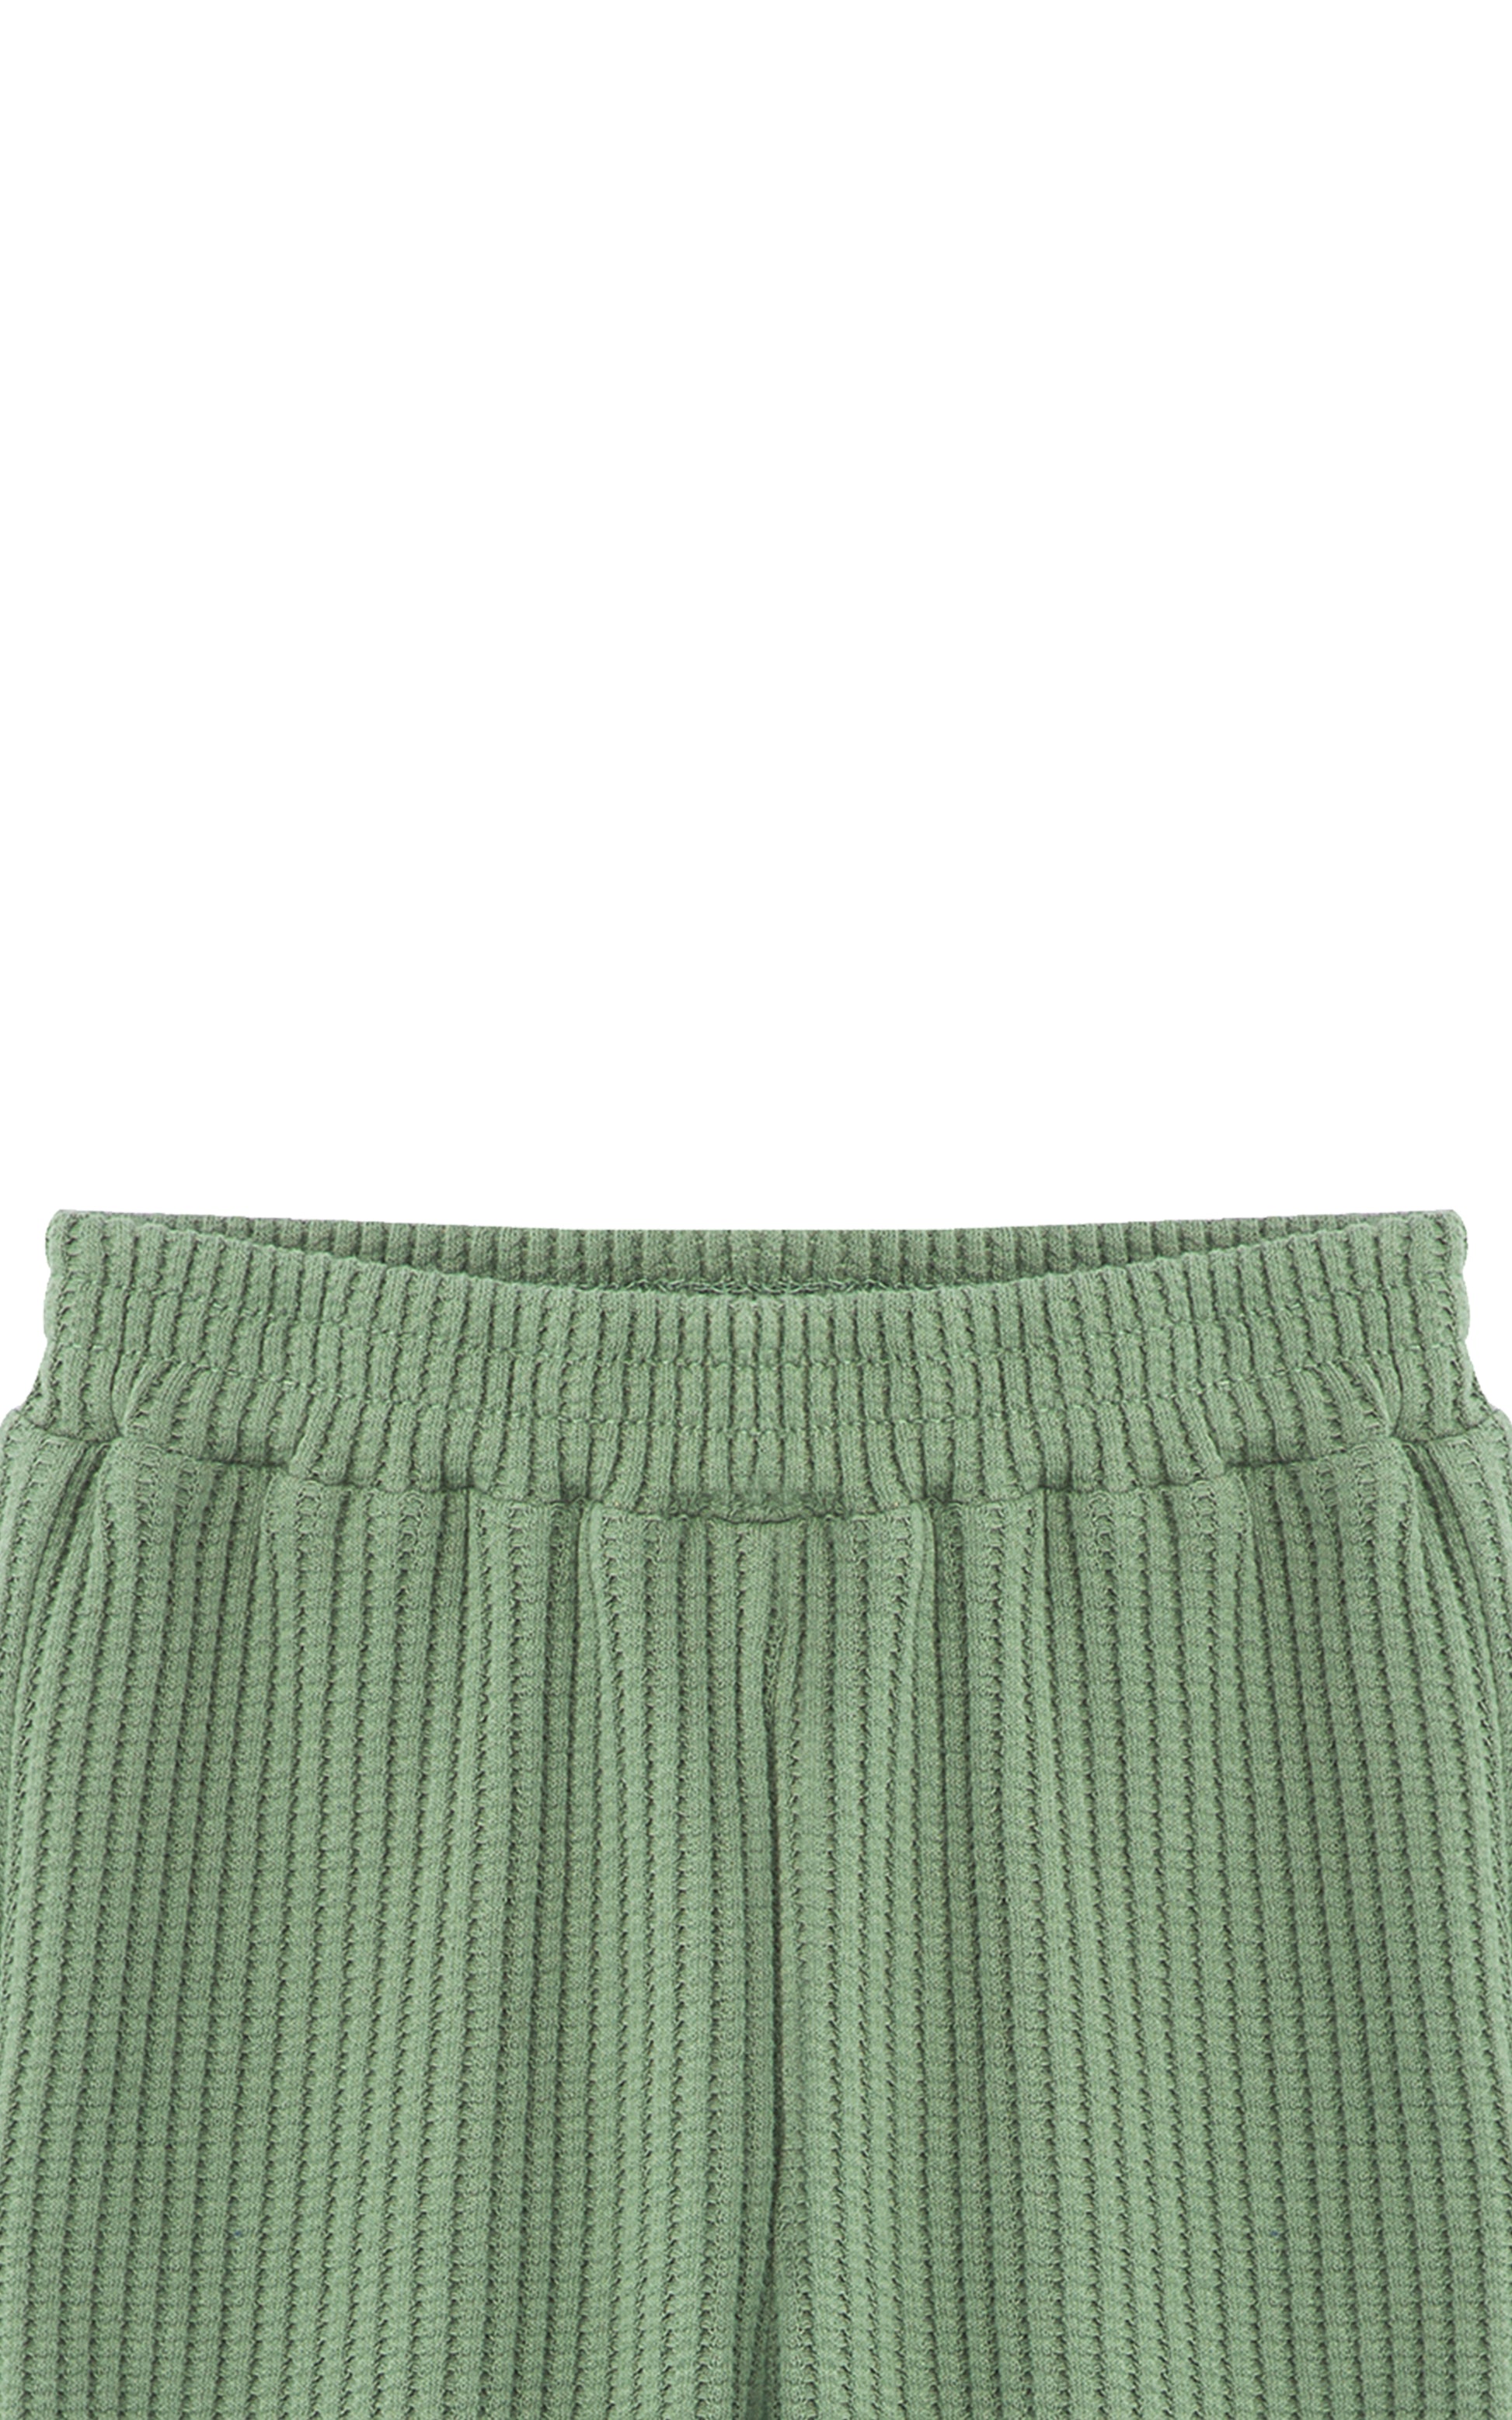 Front view of green textured knit pant